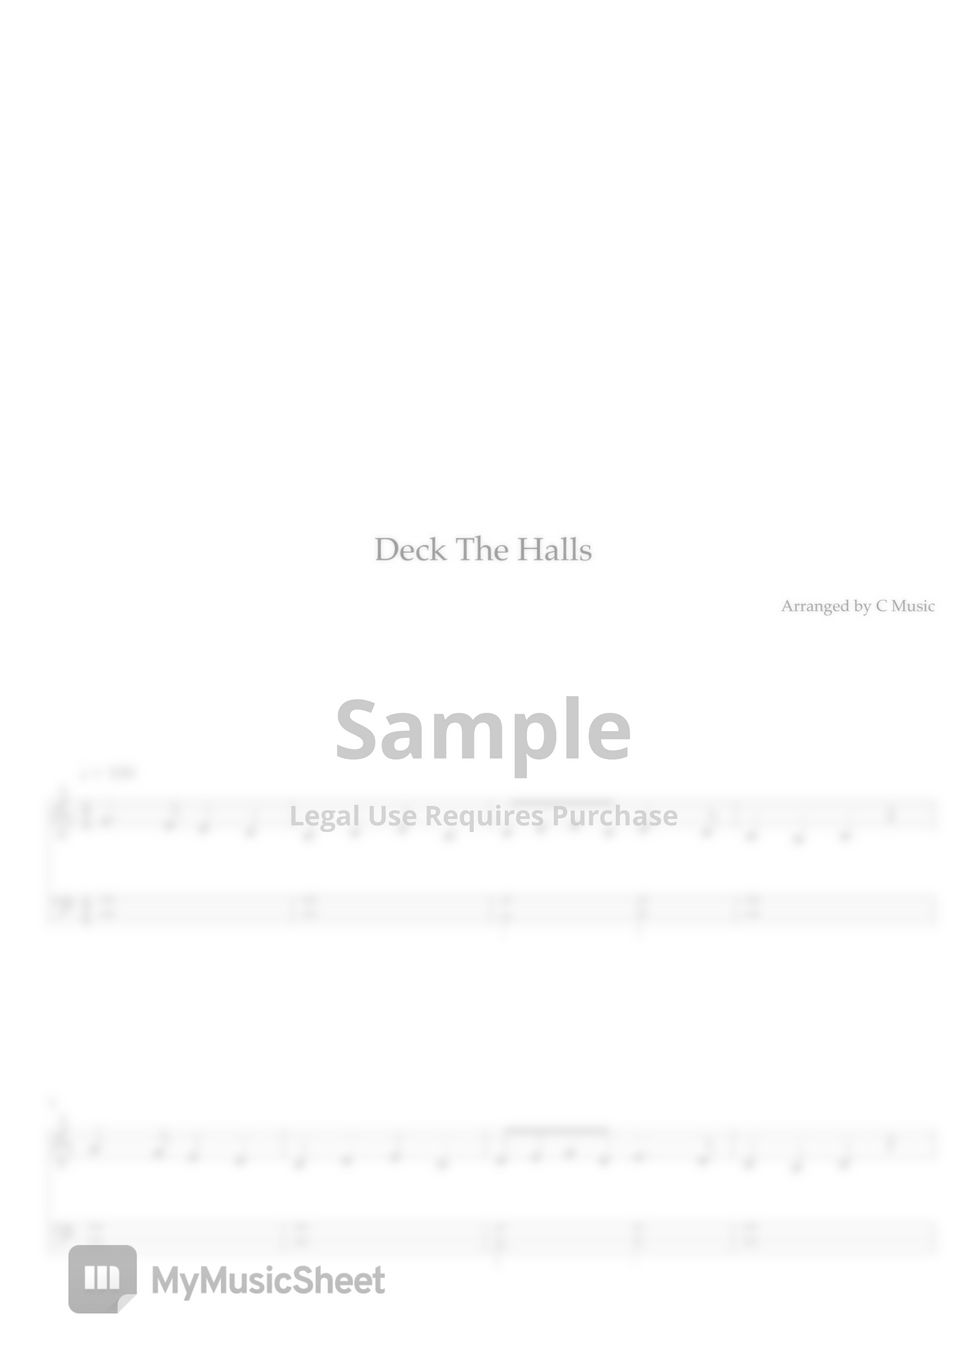 Thomas Oliphant, - Deck the Halls (Easy Version) by C Music